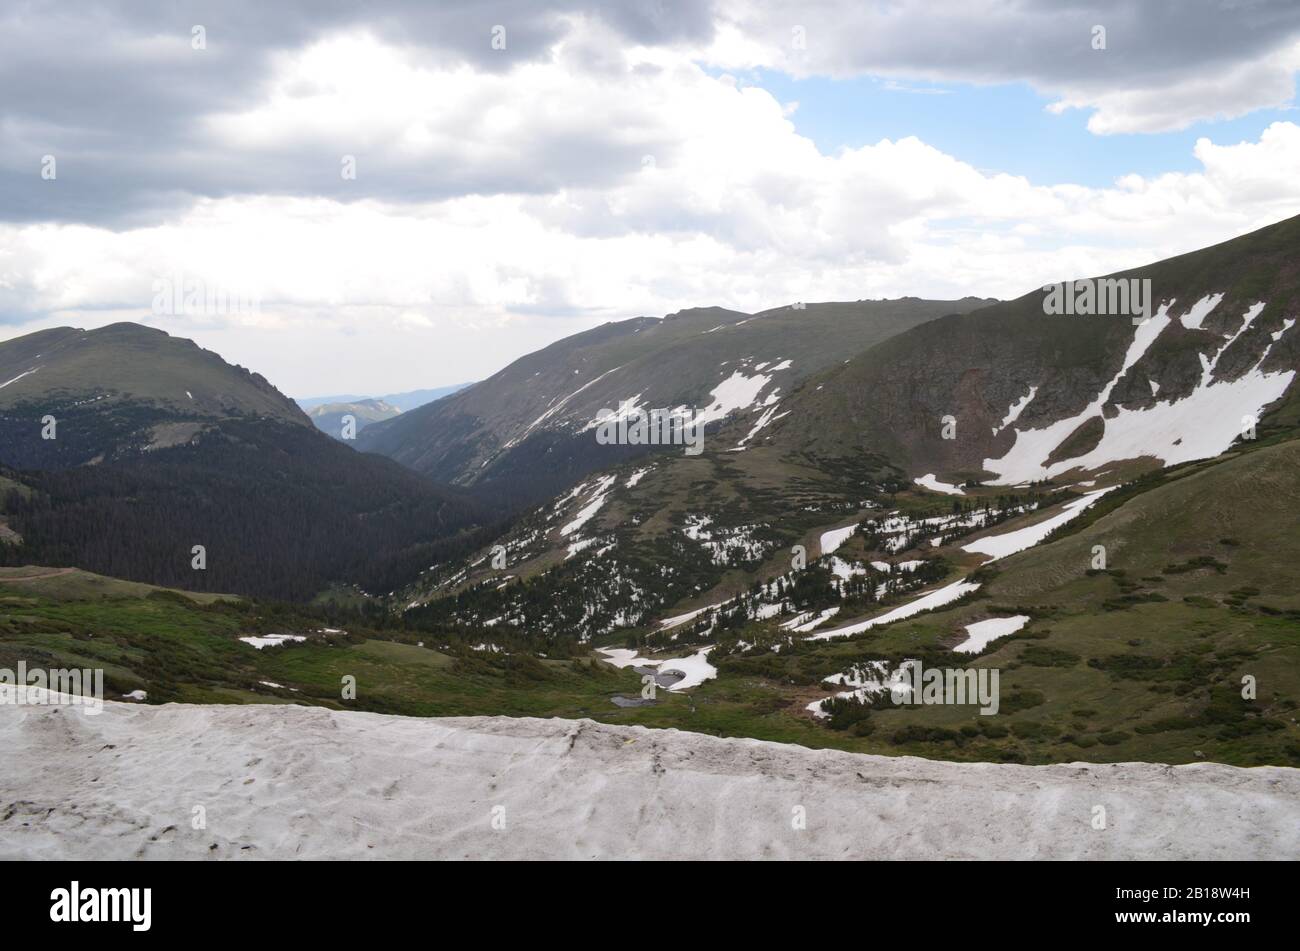 Summer in Rocky Mountain National Park: Alpine Tundra, Fall River Glacier Cirque, Fall River Valley and Old Fall River Road From Alpine Visitor Center Stock Photo